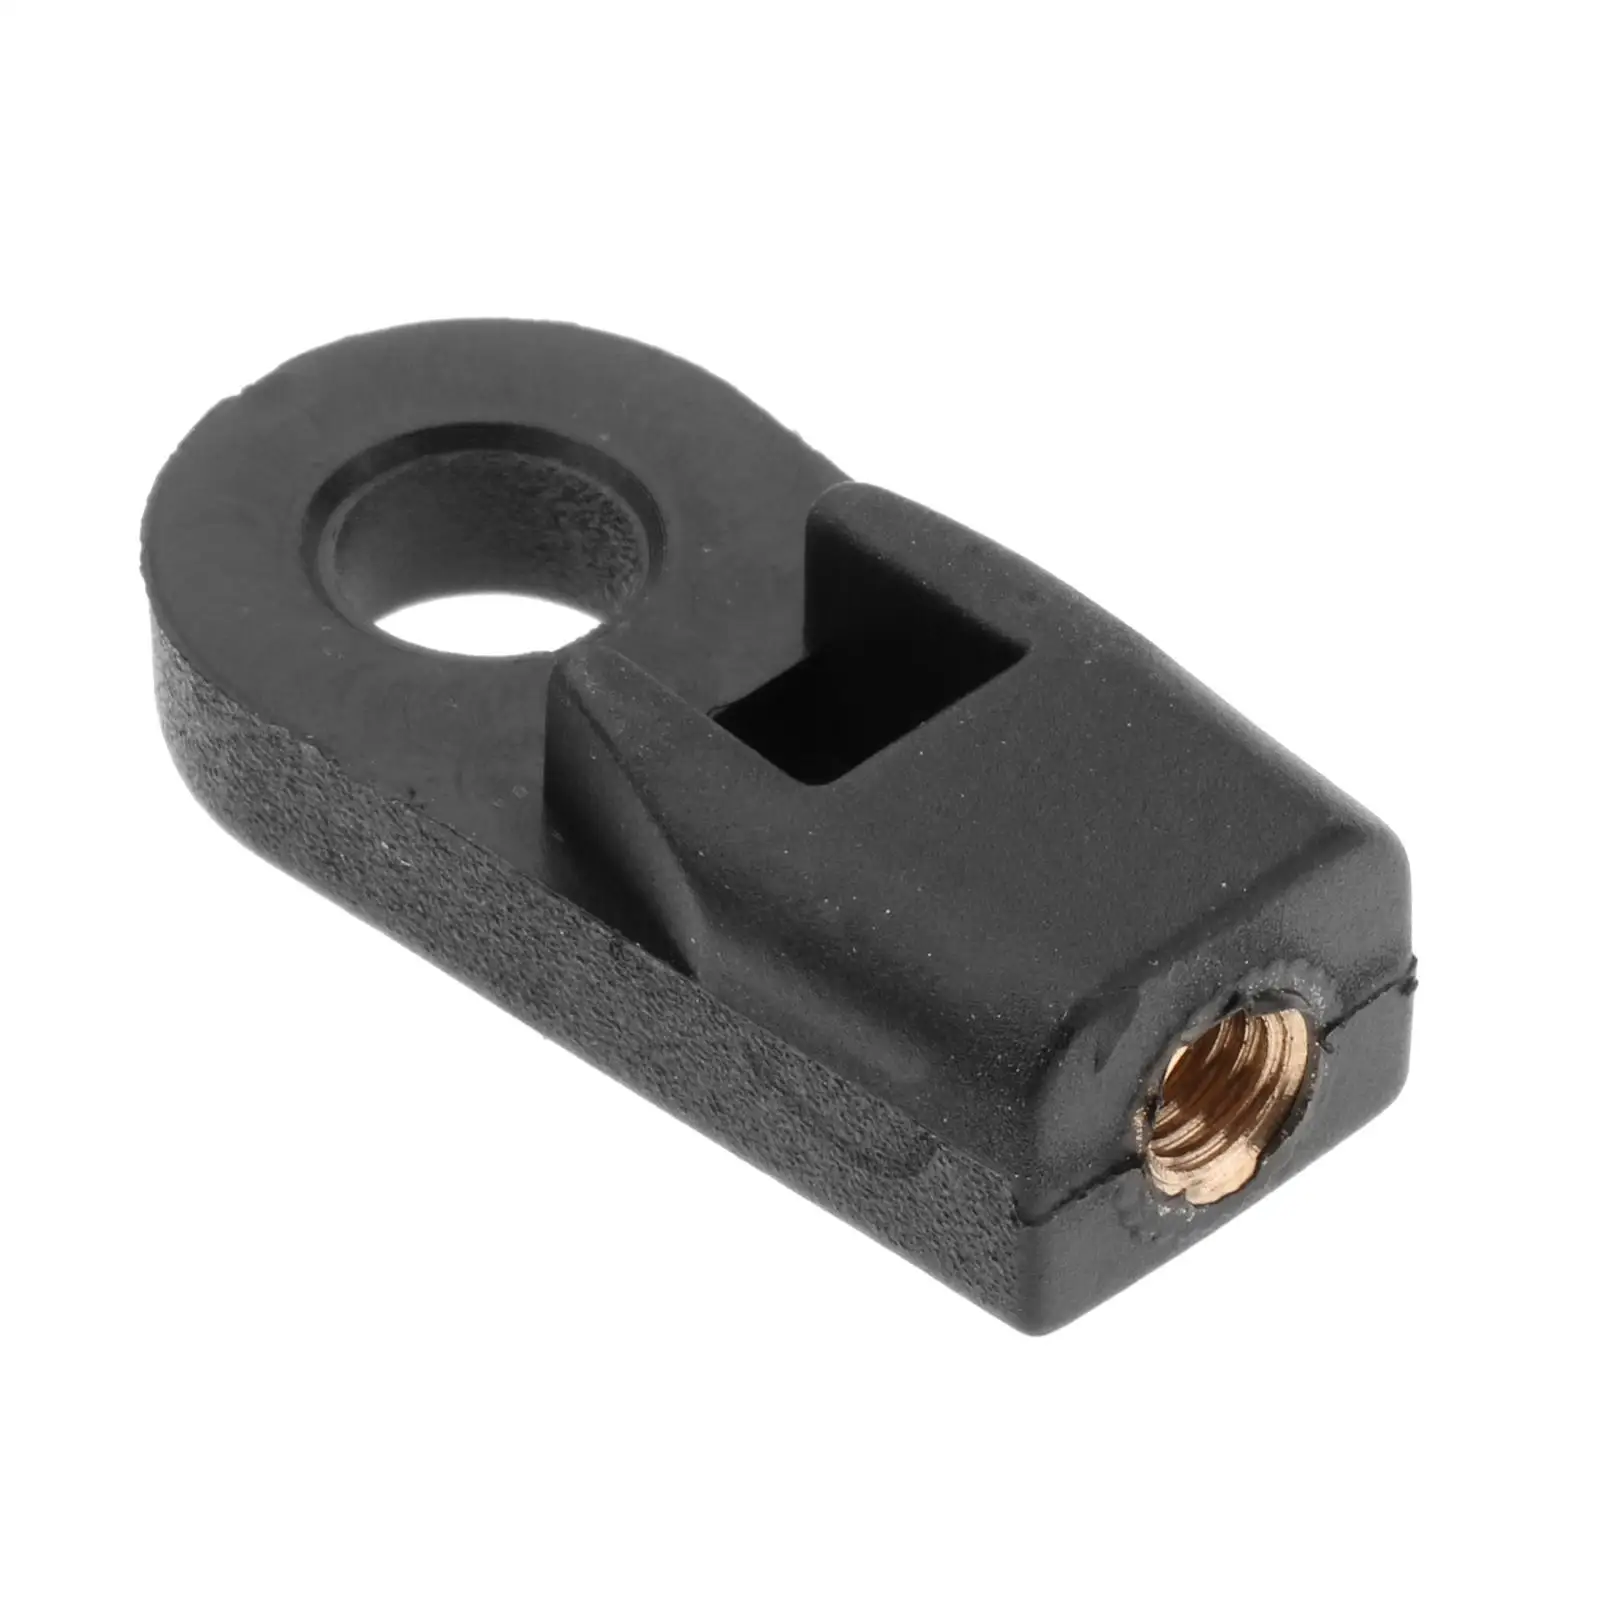 1pcs Professional Cable End Connector Repalcements Accessory Black